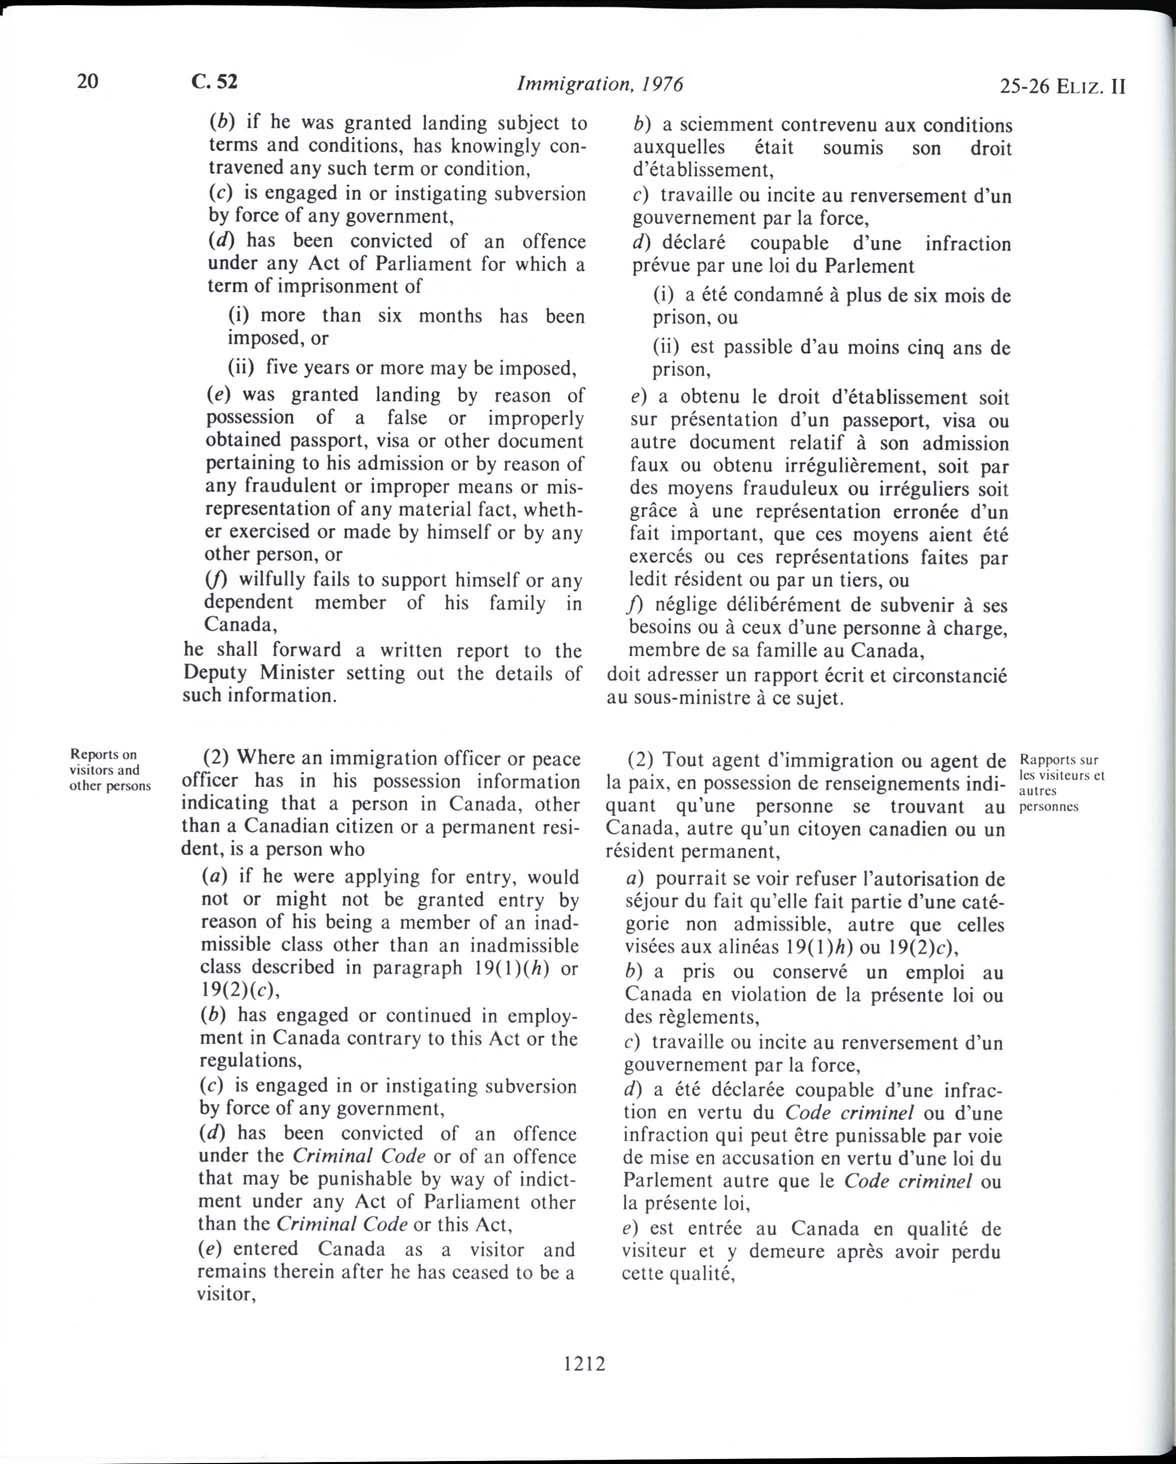 Page 1212 Immigration Act, 1976